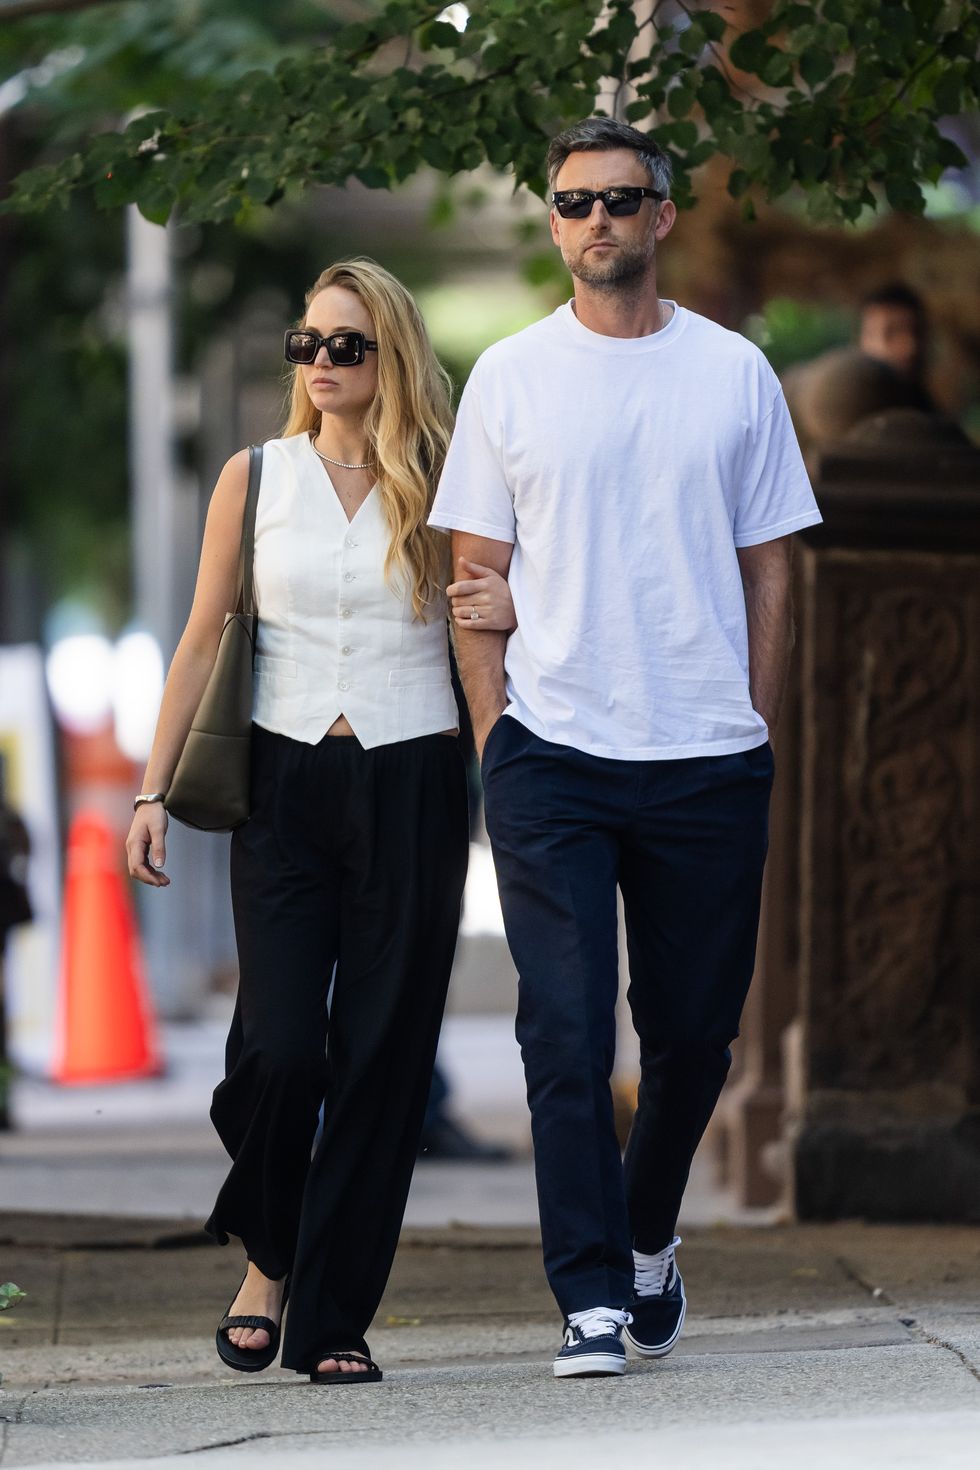 Jennifer Lawrence And Cooke Maroney Are Seen In The Upper News Photo 1695631333 ?resize=980 *